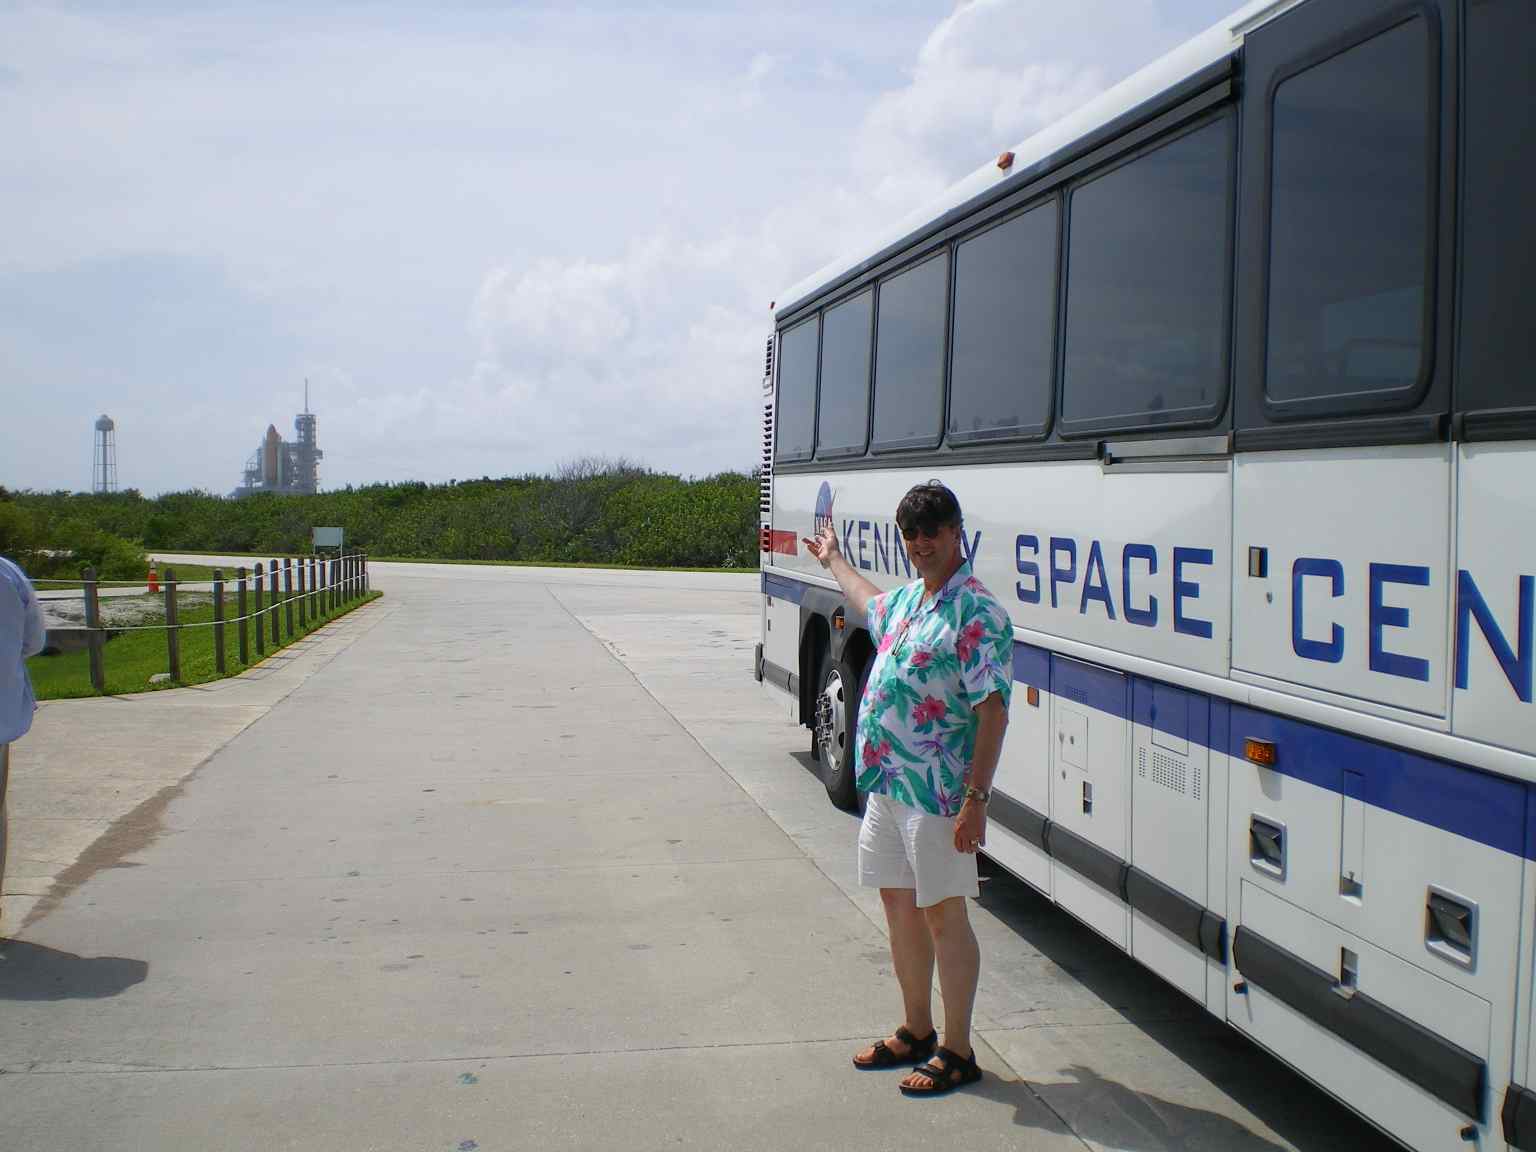 This stop is halfway between pad 39-A and 39-B